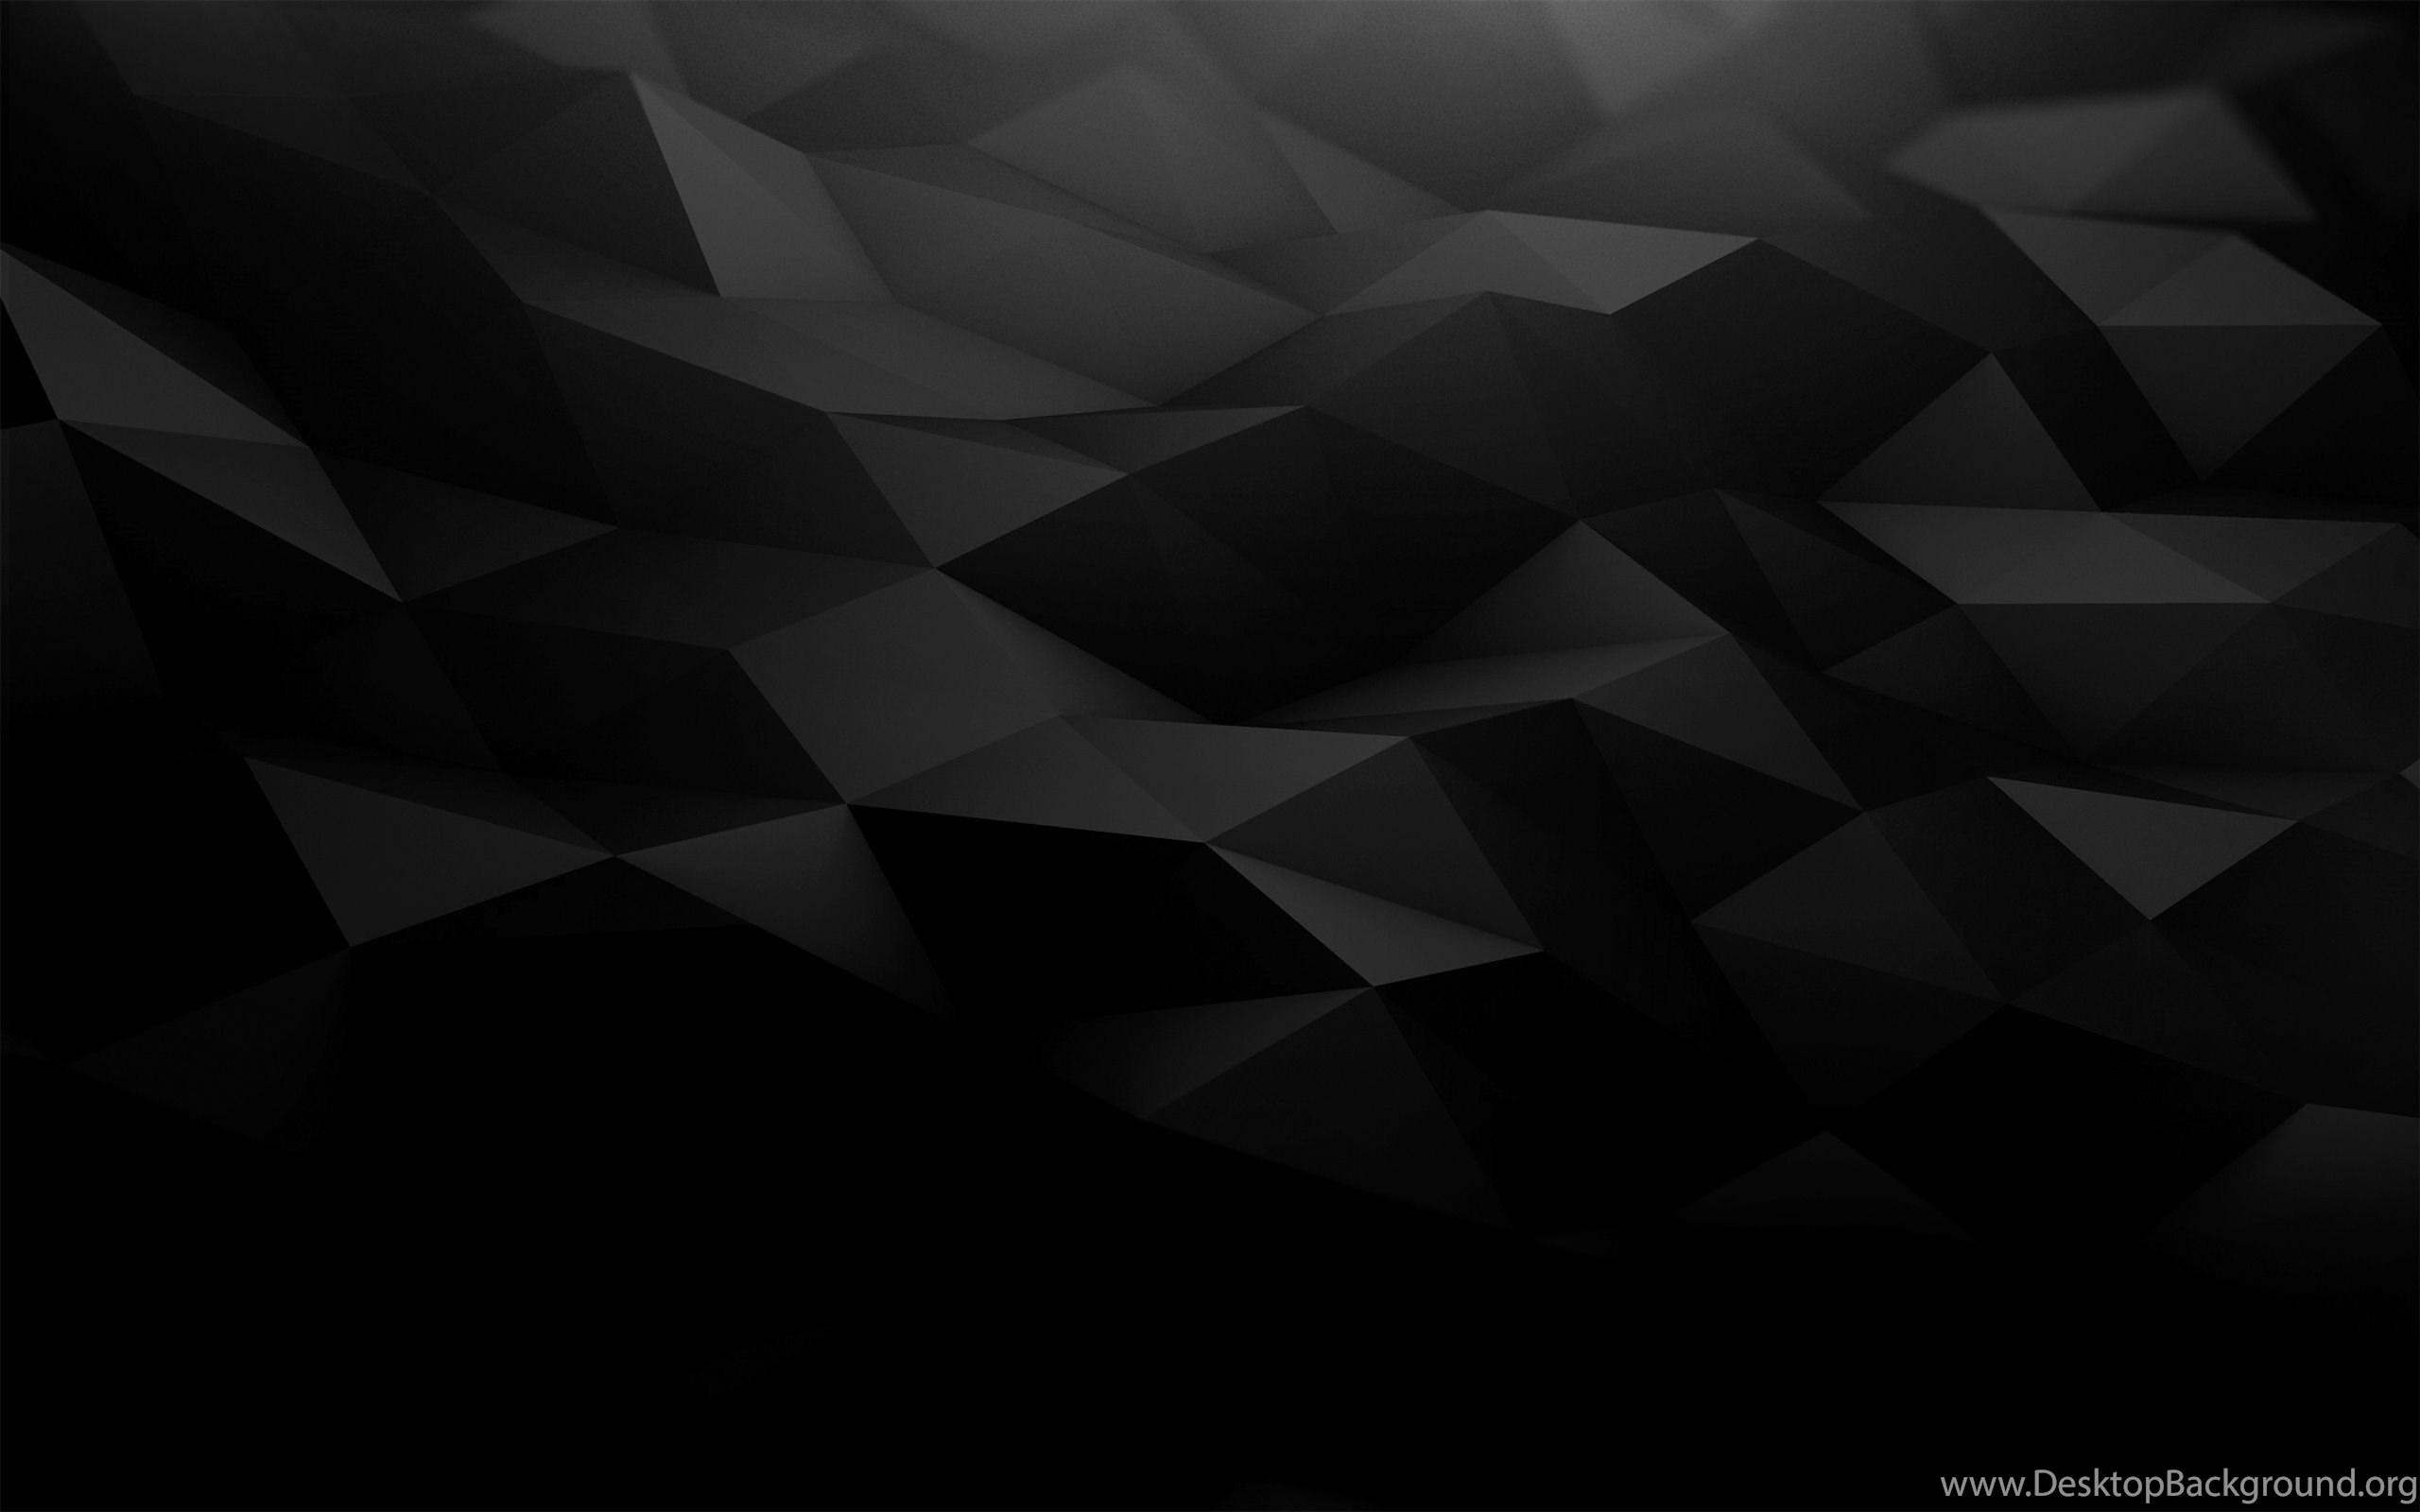 Polygon Art Abstract Black Hd Wallpapers For 1280x720 Resolution Images, Photos, Reviews